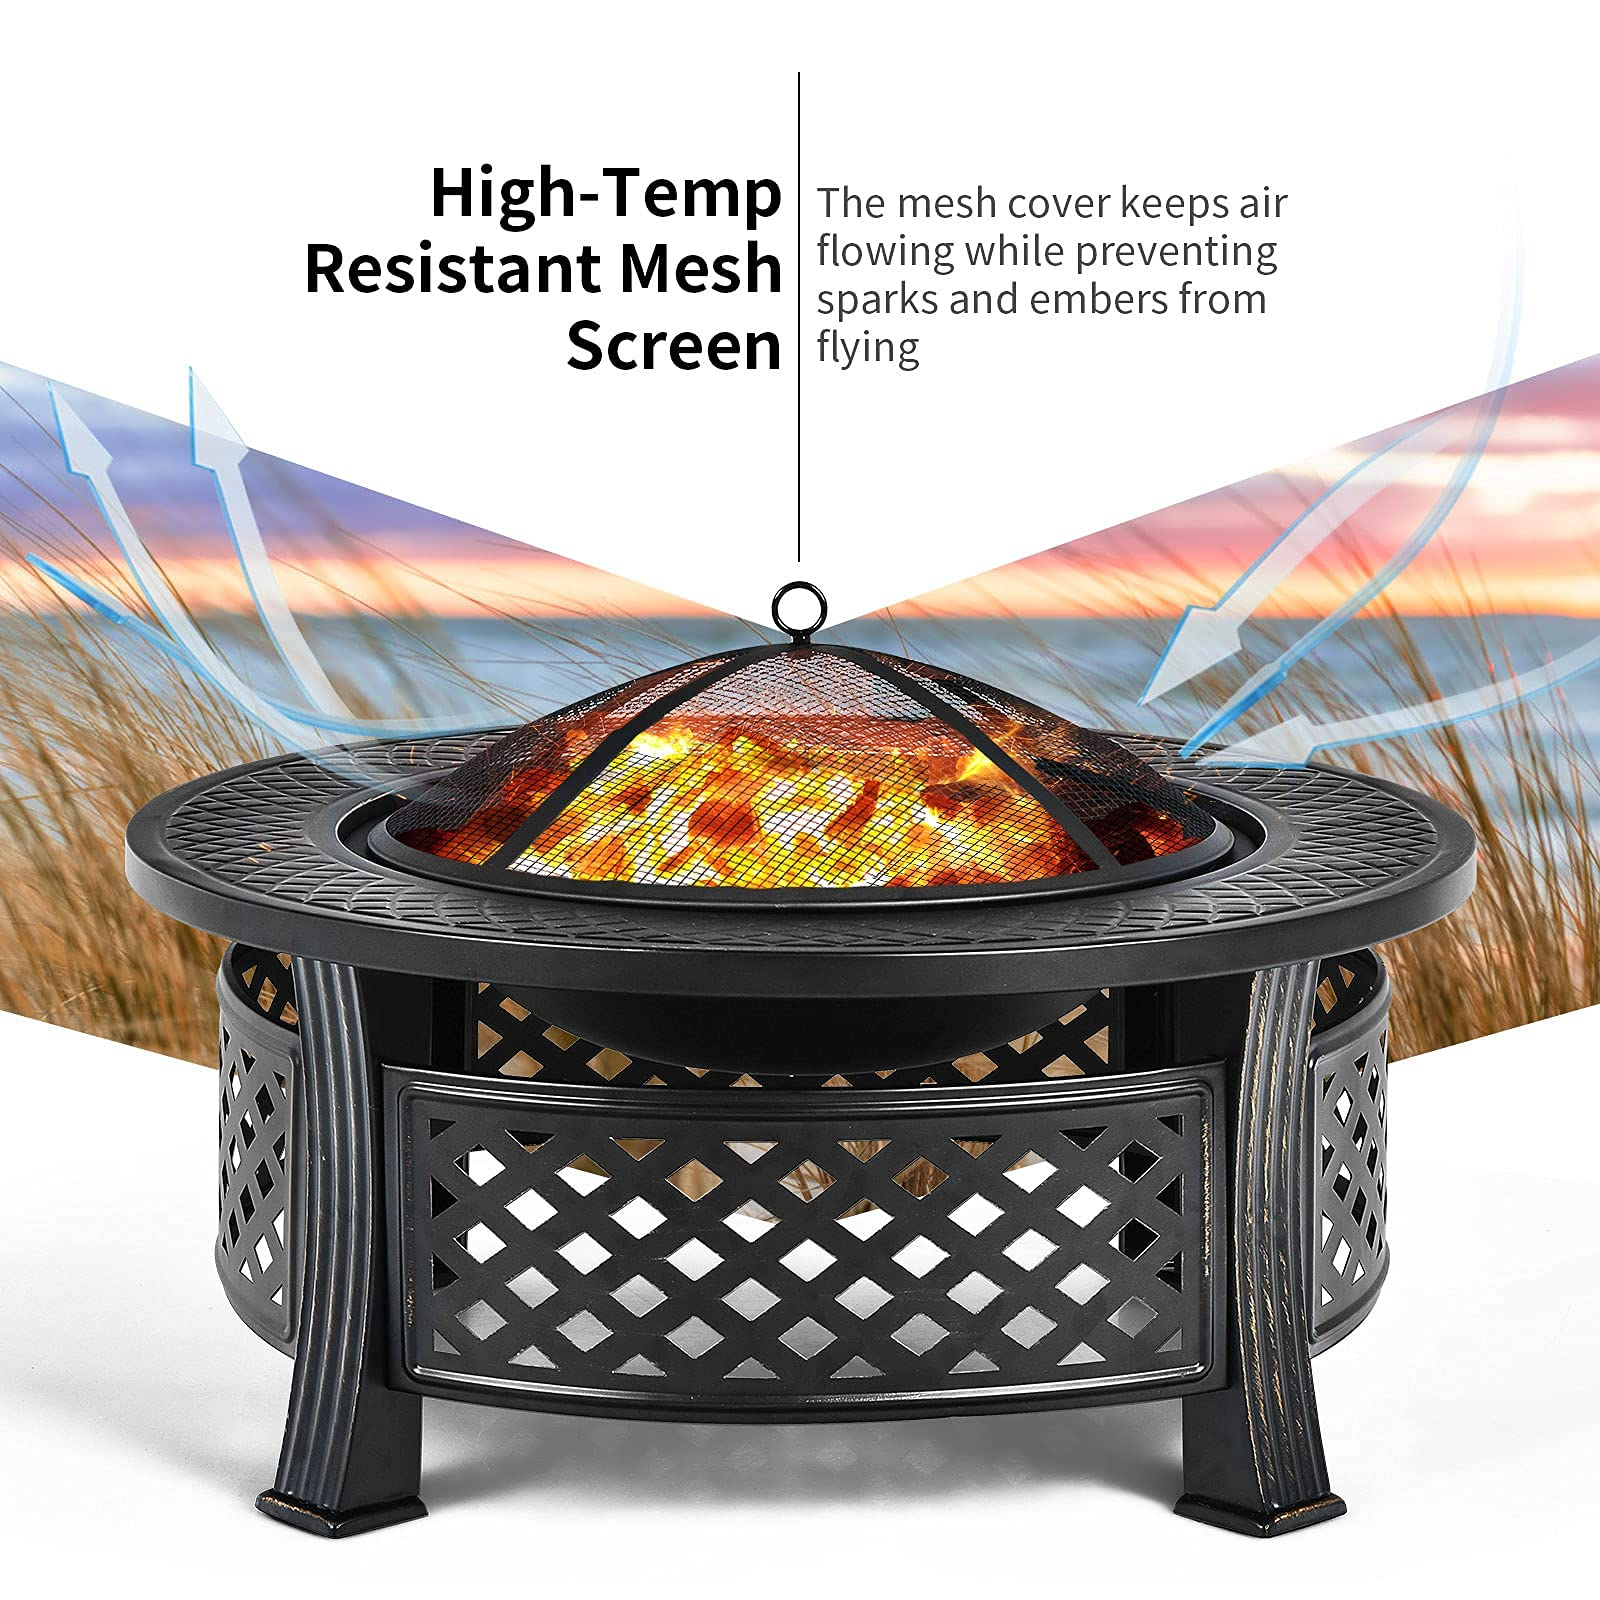 Giantex 32" Fire Pit, 3 in 1 Round Log Burner w/ High-Temp Resistance Finish